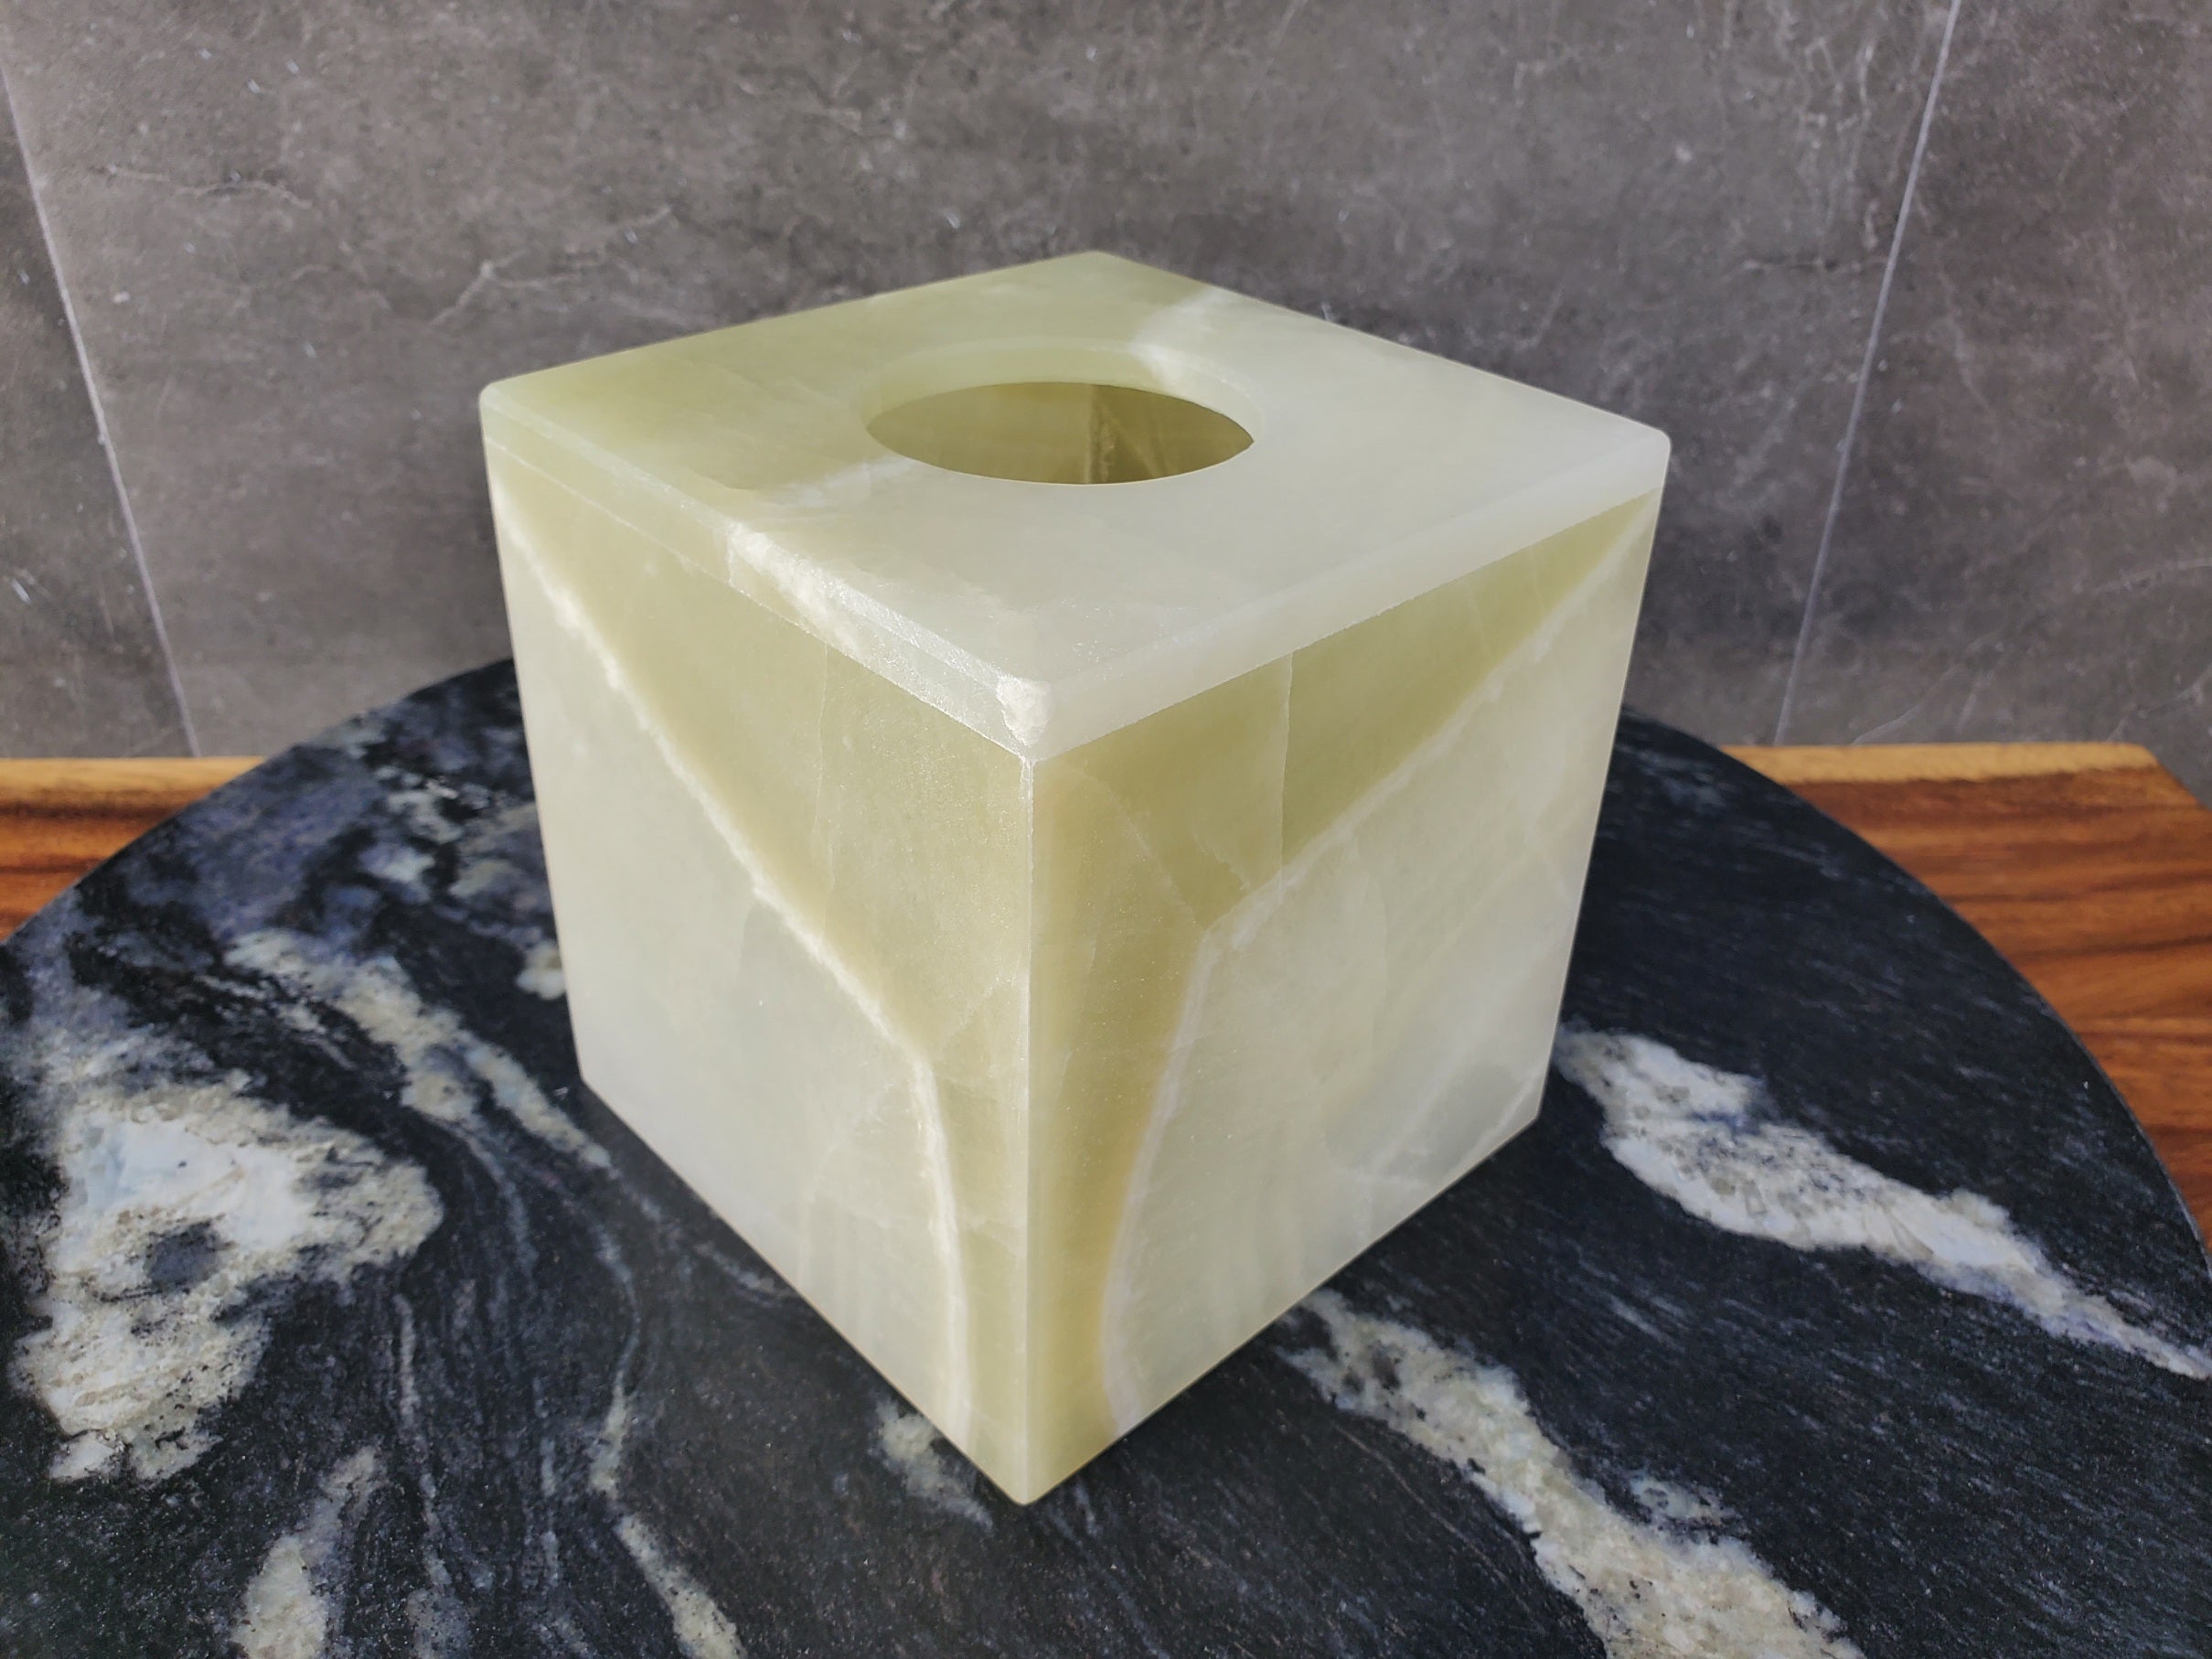 Green Onyx Stone Tissue Cover, Square. Fast Shipping, Handmade. Standard Cube Size. Buy Now at www.felipe grace.com.